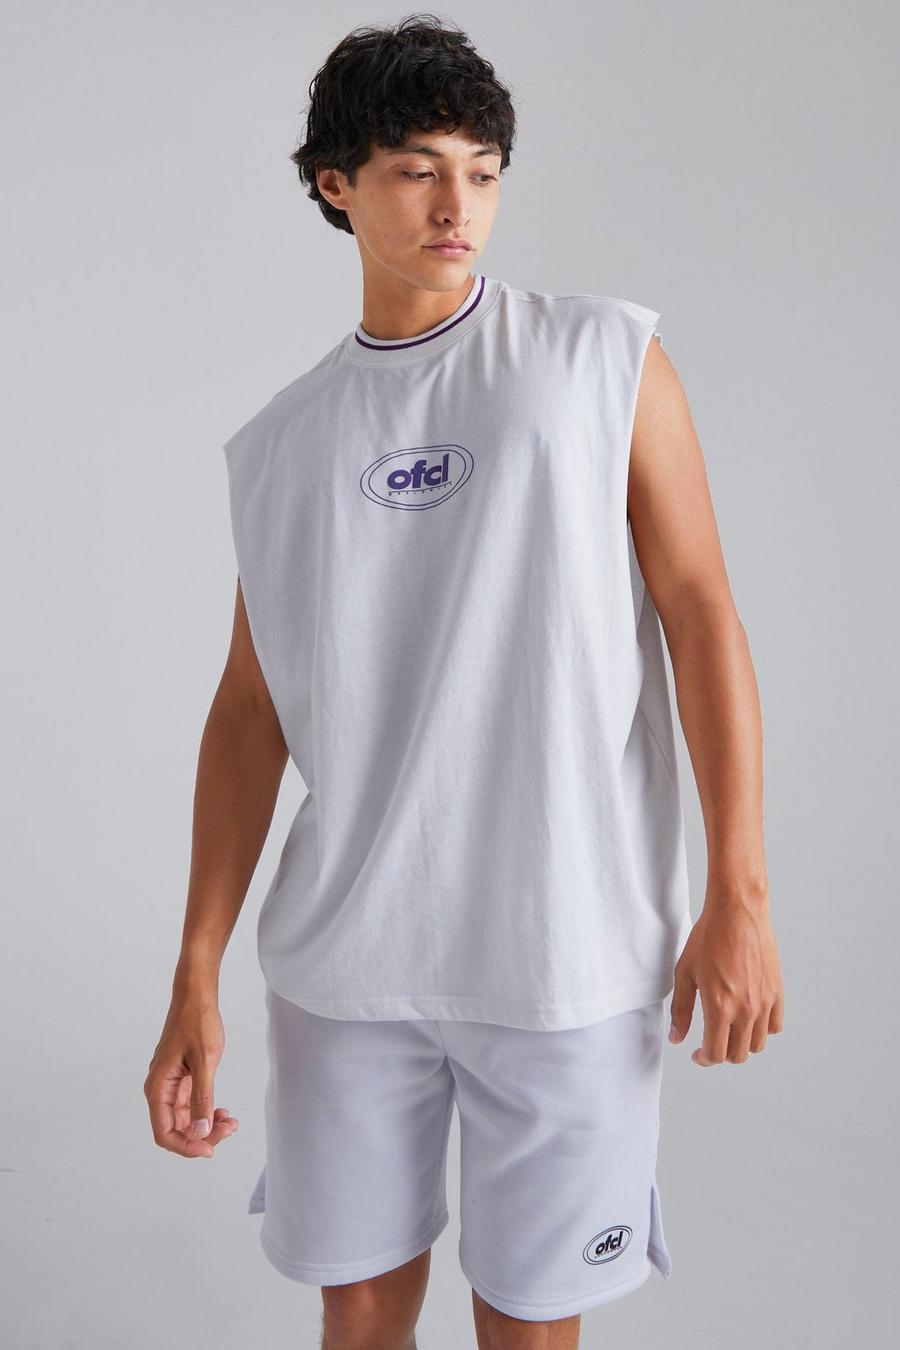 White Oversized Official Worldwide Tank Top Met Grote Armgaten image number 1